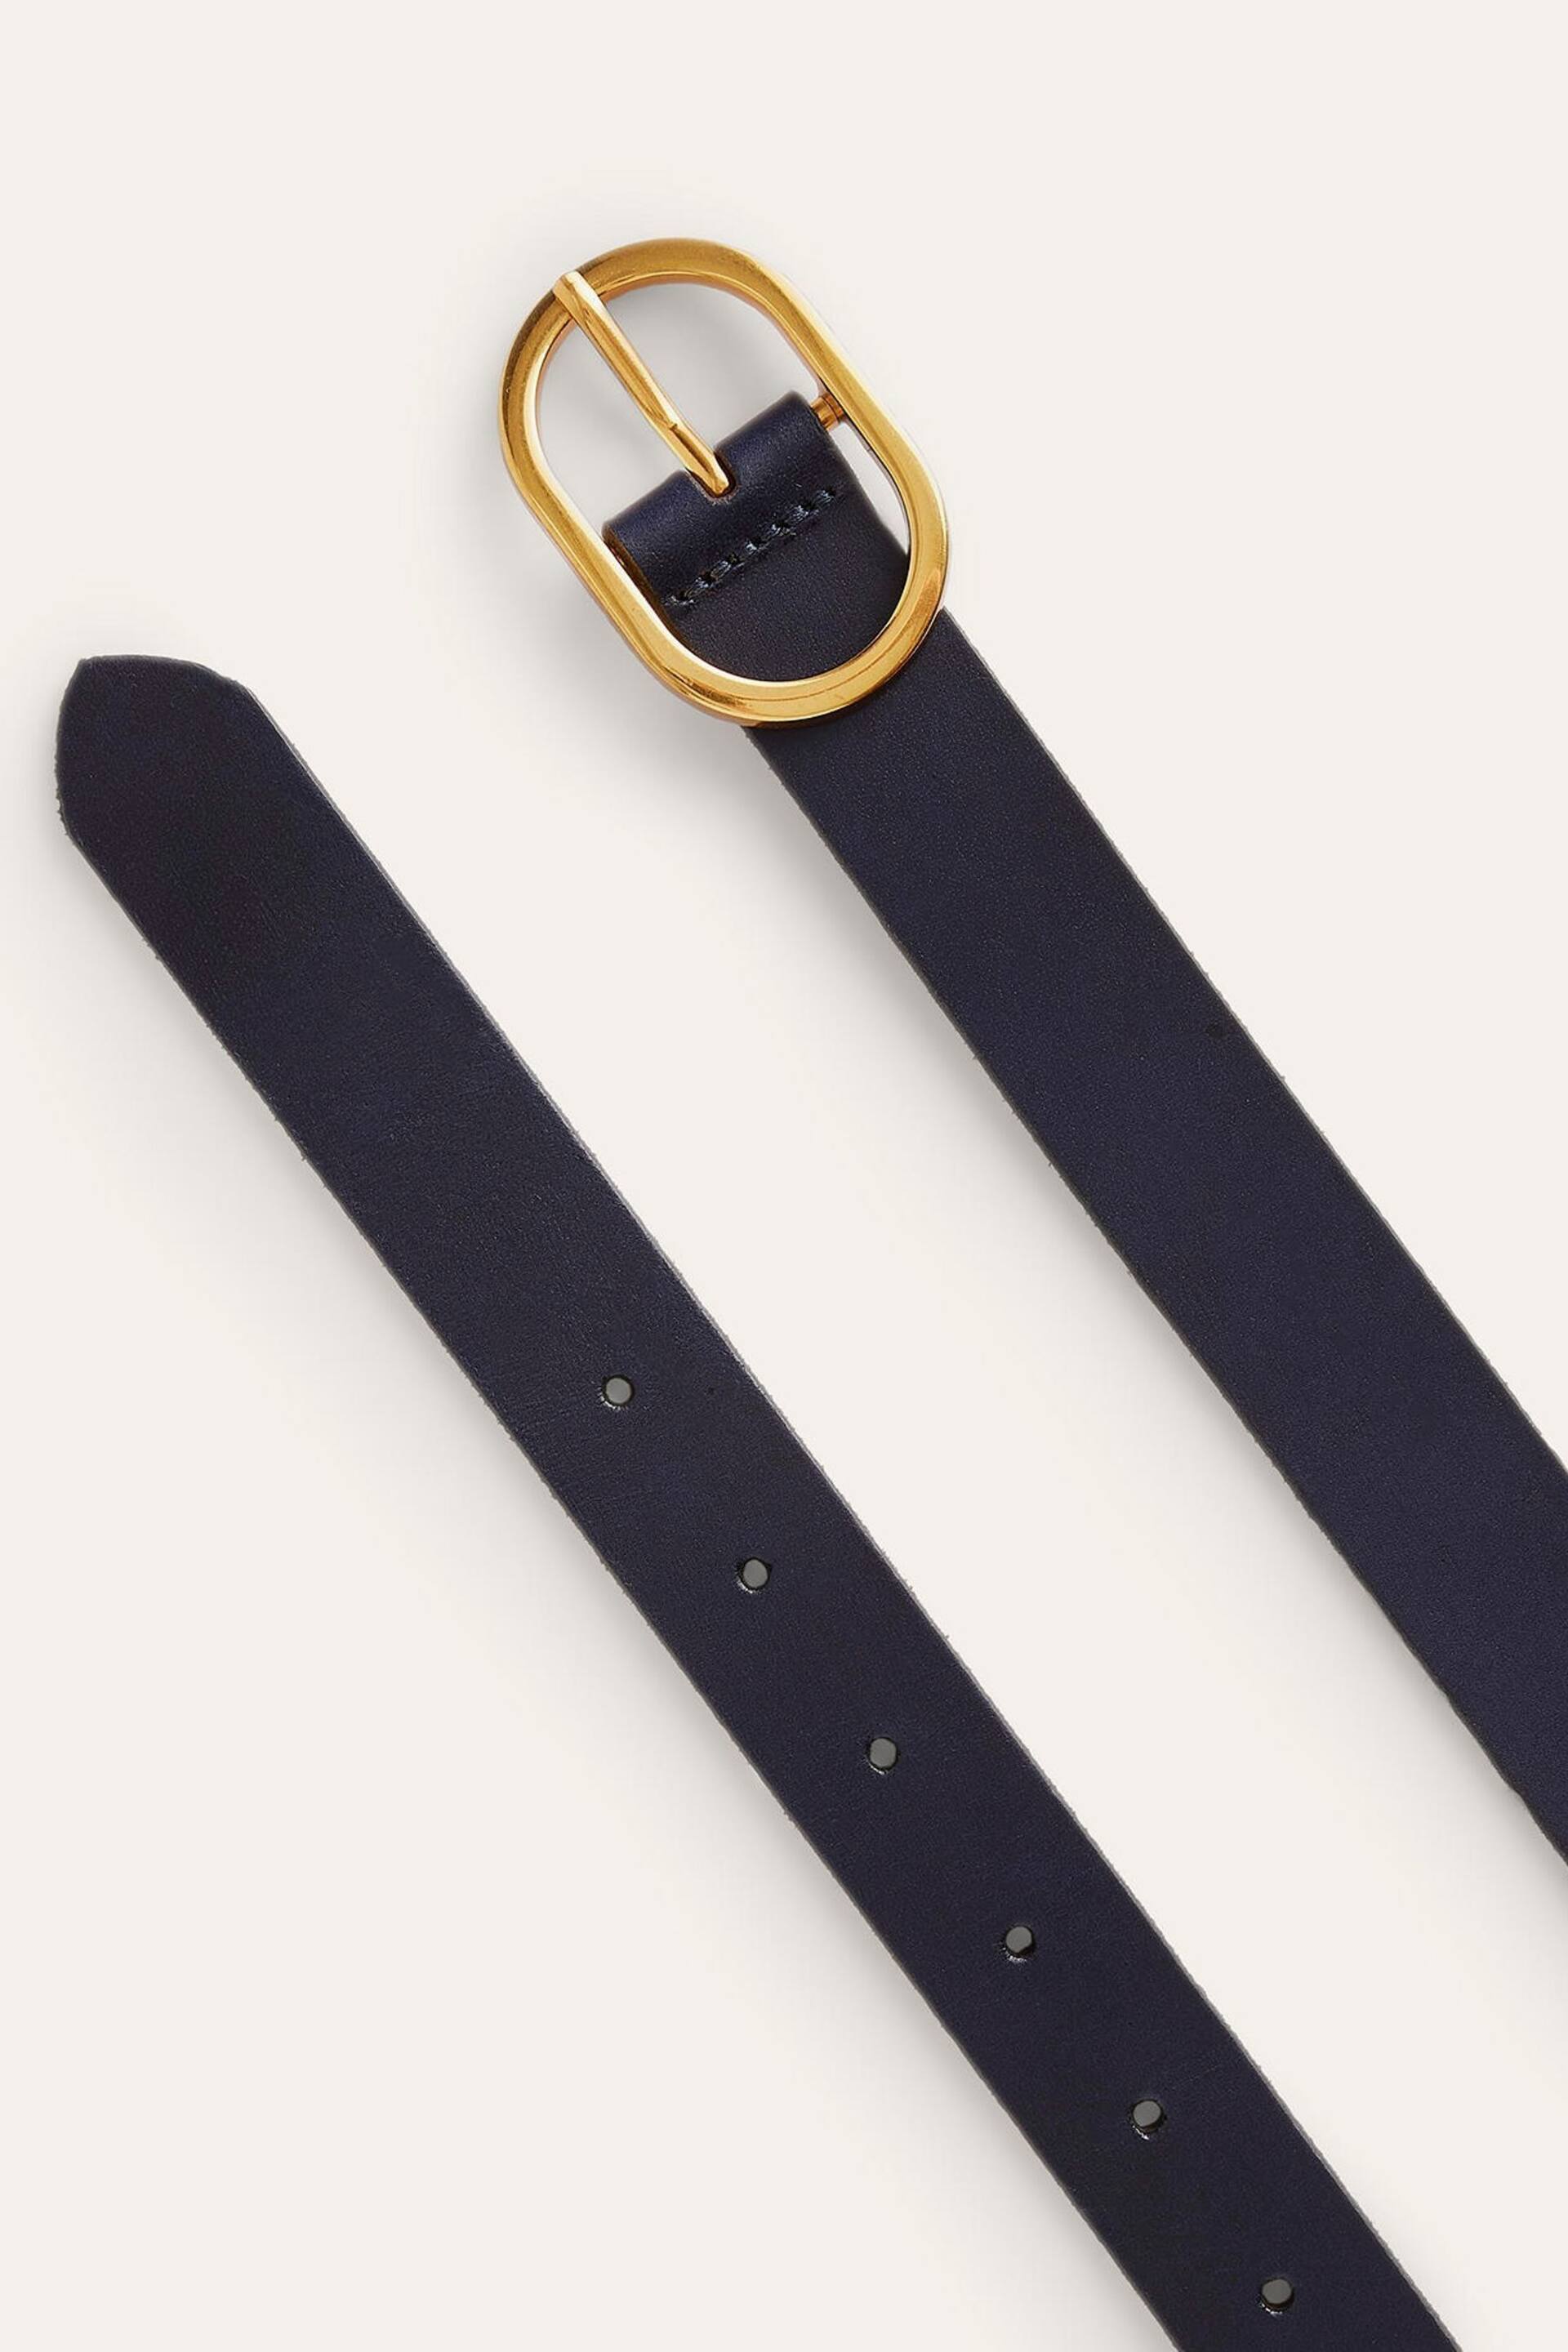 Boden Blue Classic Leather Belt - Image 2 of 3